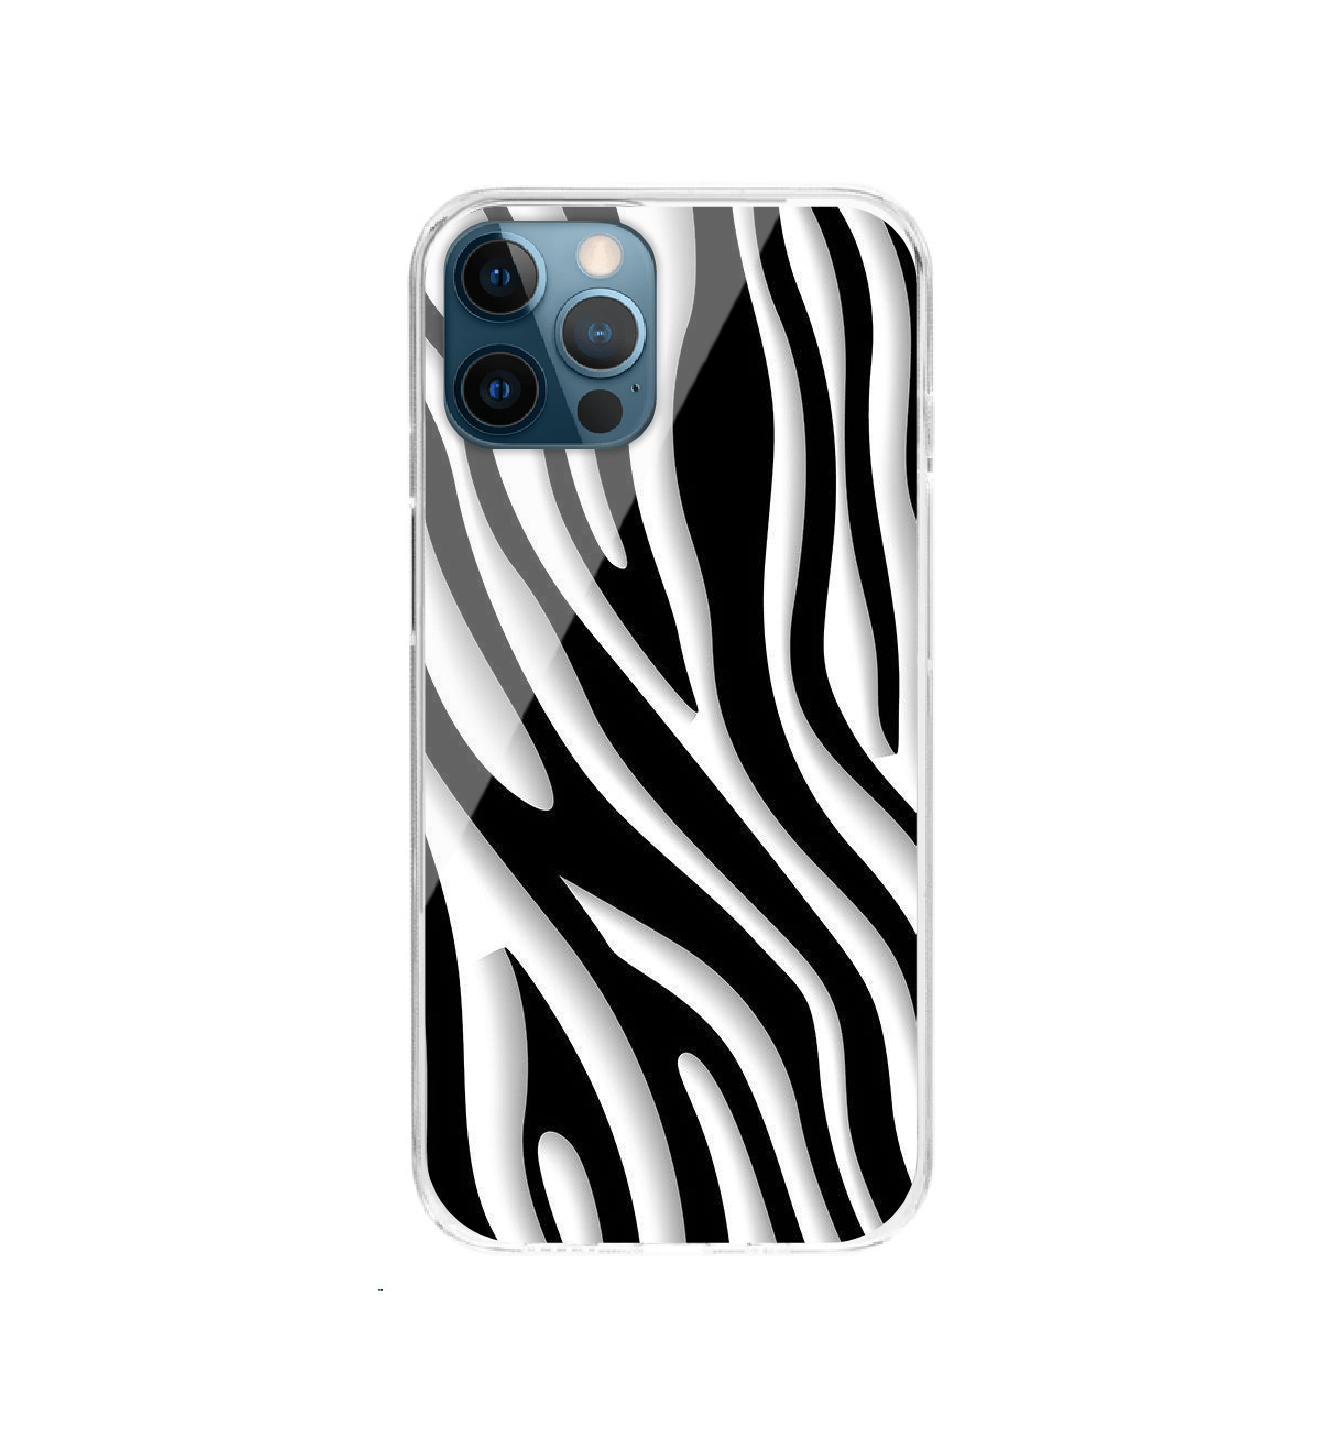 Zebra Print - Silicon Case For Apple iPhone Models